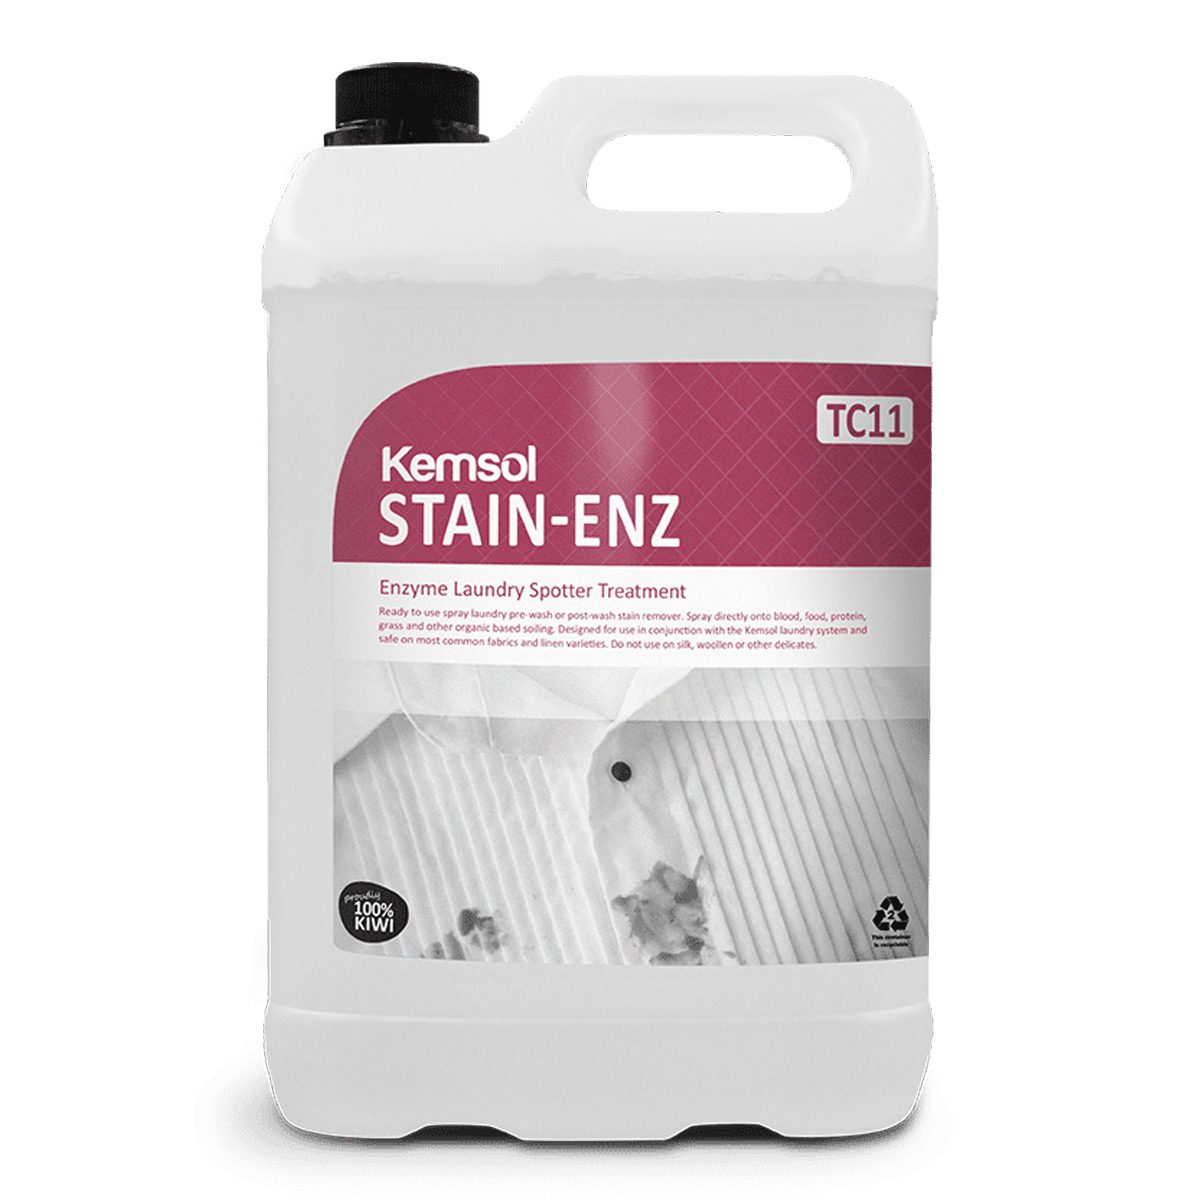 cleaning-products-laundry-kemsol-stain-enz-laundry-spotter-5L-litre-laundry-pre-wash-or-post-wash-stain-remover-blood-food-protein-grass-organic-based-soiling-vjs-distributors-KSTAINE